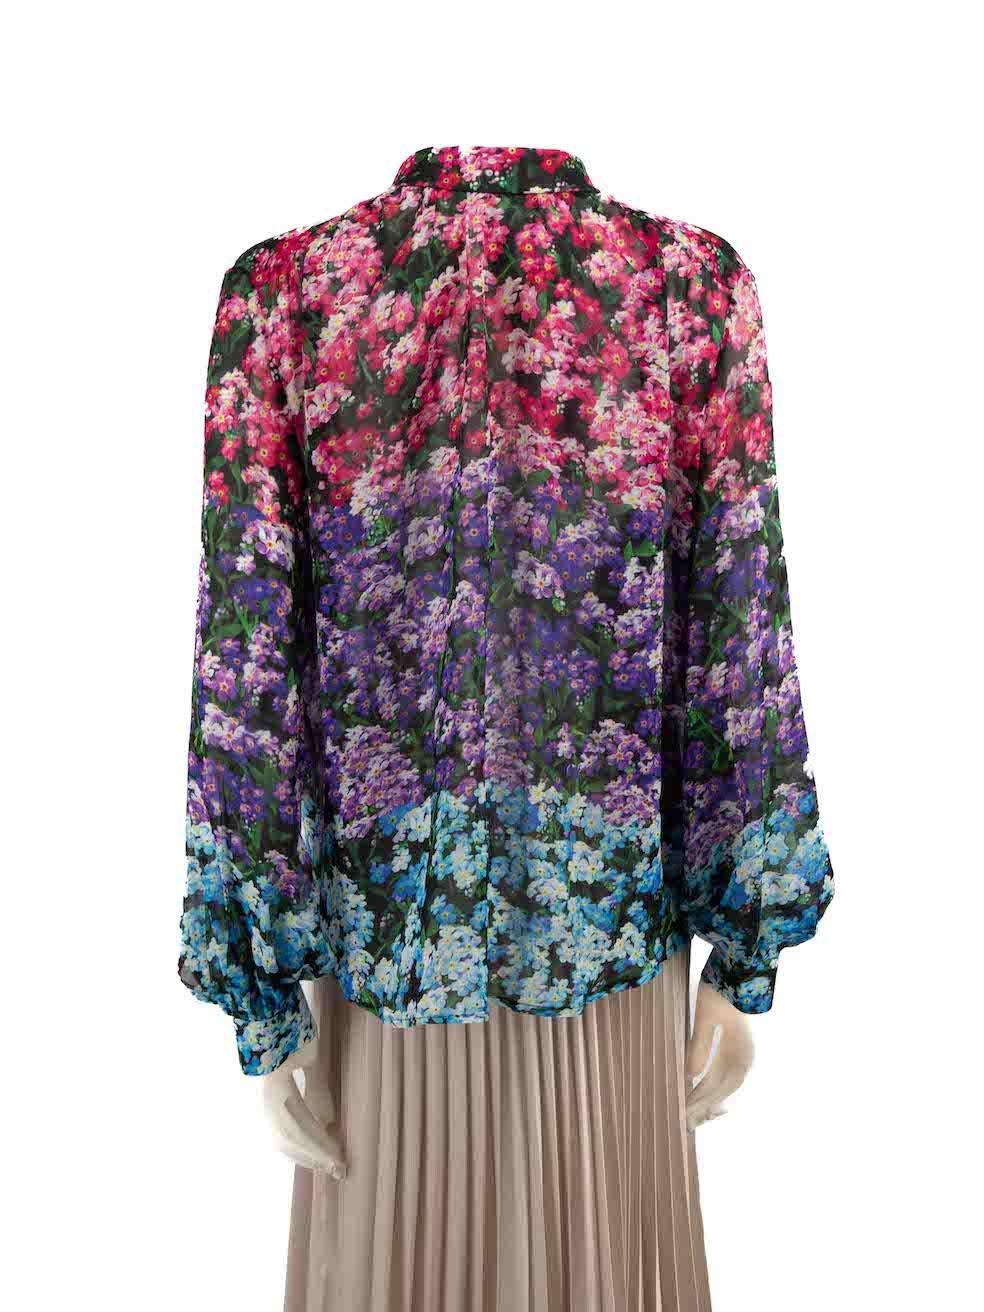 Mary Katrantzou Floral Pattern Silk Sheer Blouse Size XL In Good Condition For Sale In London, GB